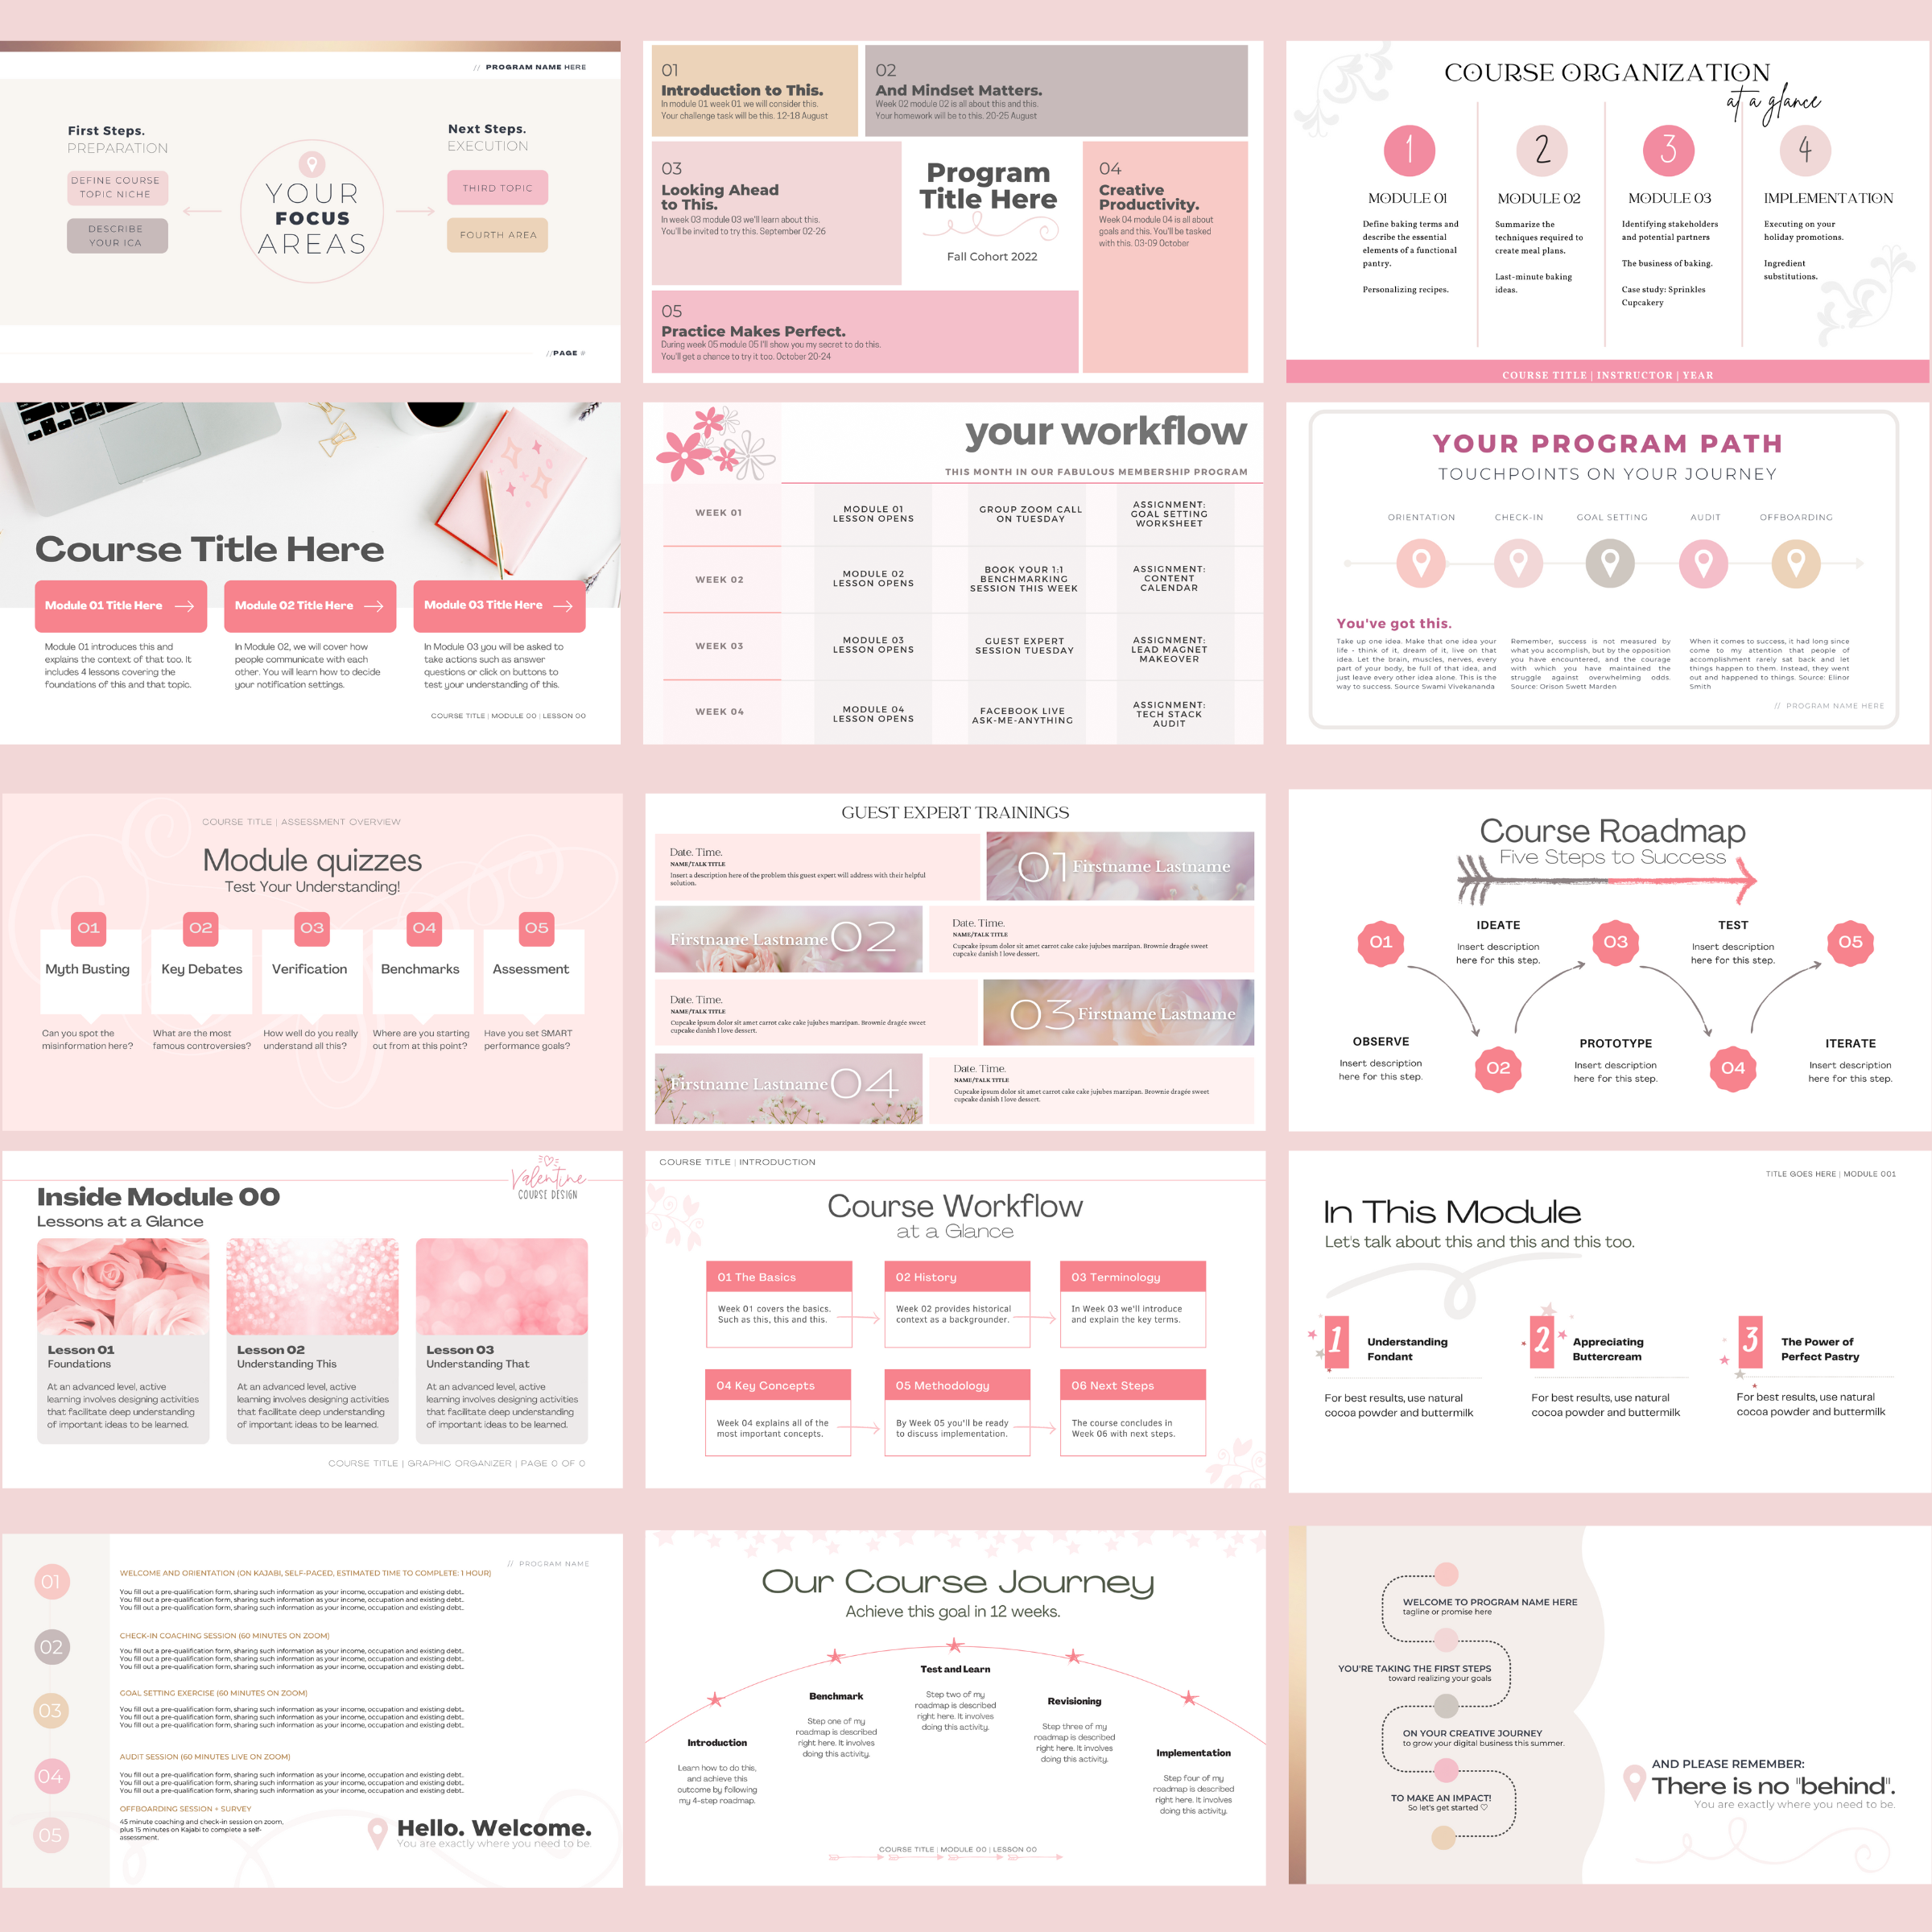 Onboarding Diagrams / Graphic Organizers